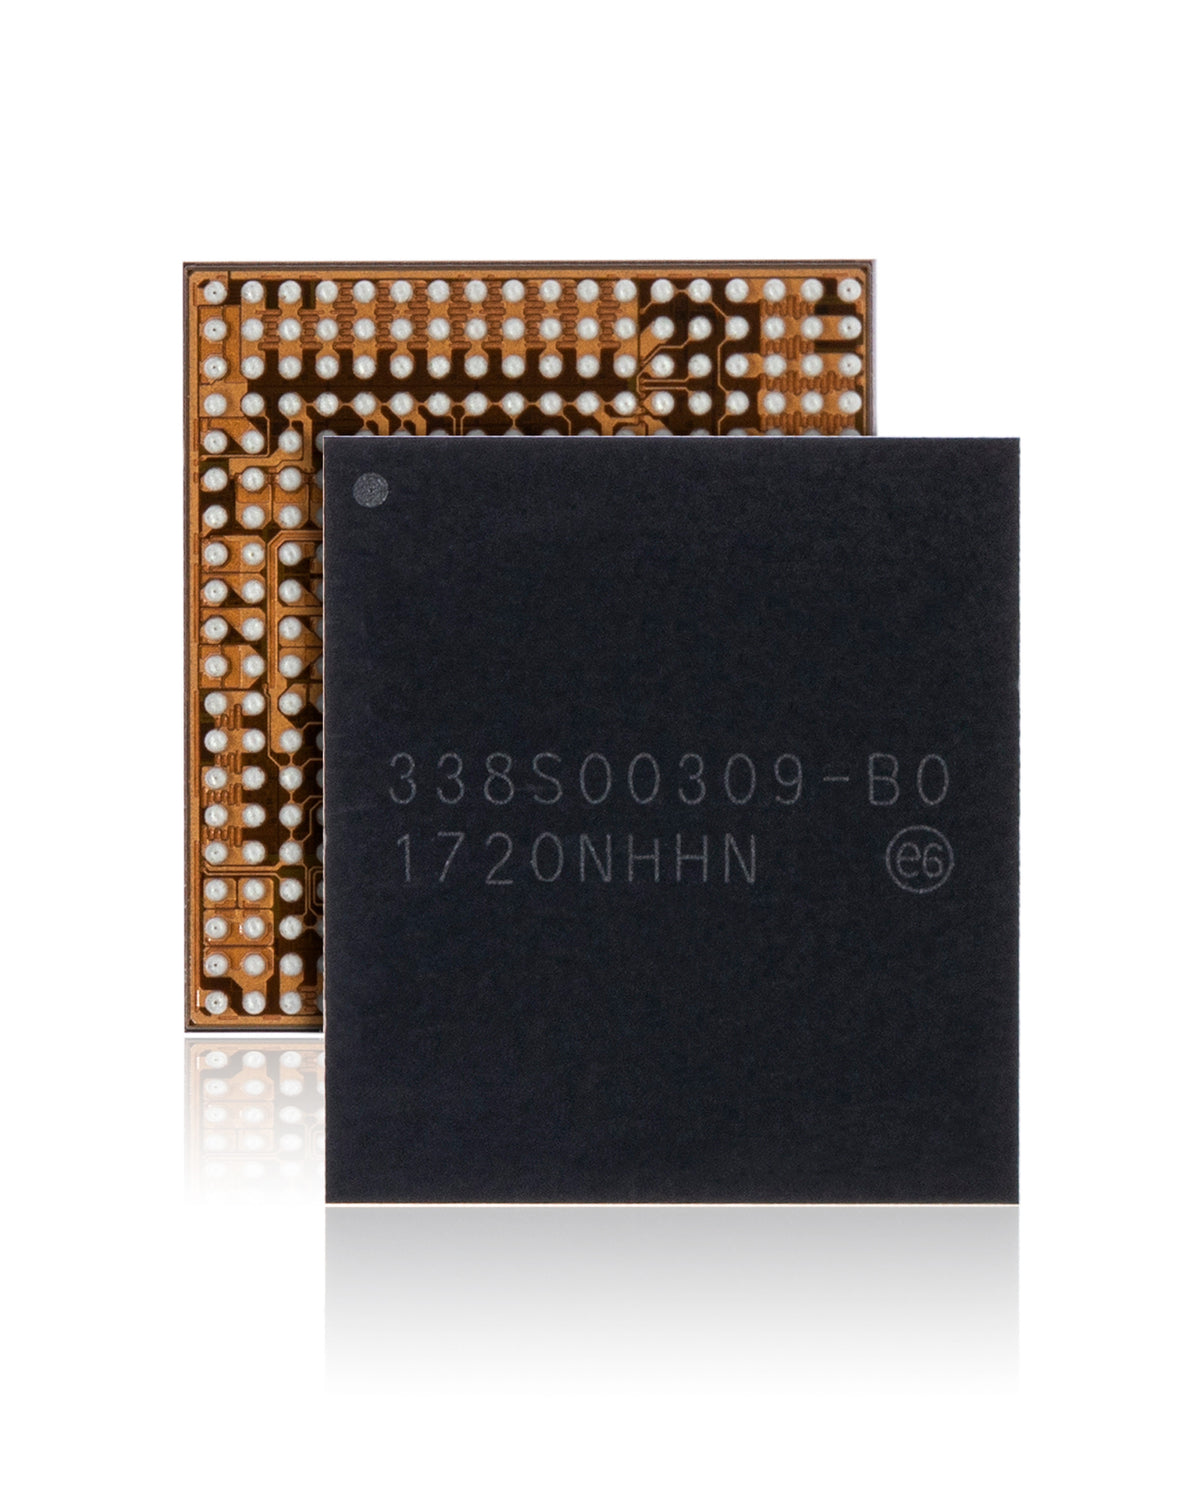 POWER MANAGEMENT PMIC IC (BIG) COMPATIBLE WITH IPHONE 8 / IPHONE 8 PLUS / X PMIC (U2700 / 338S00309)